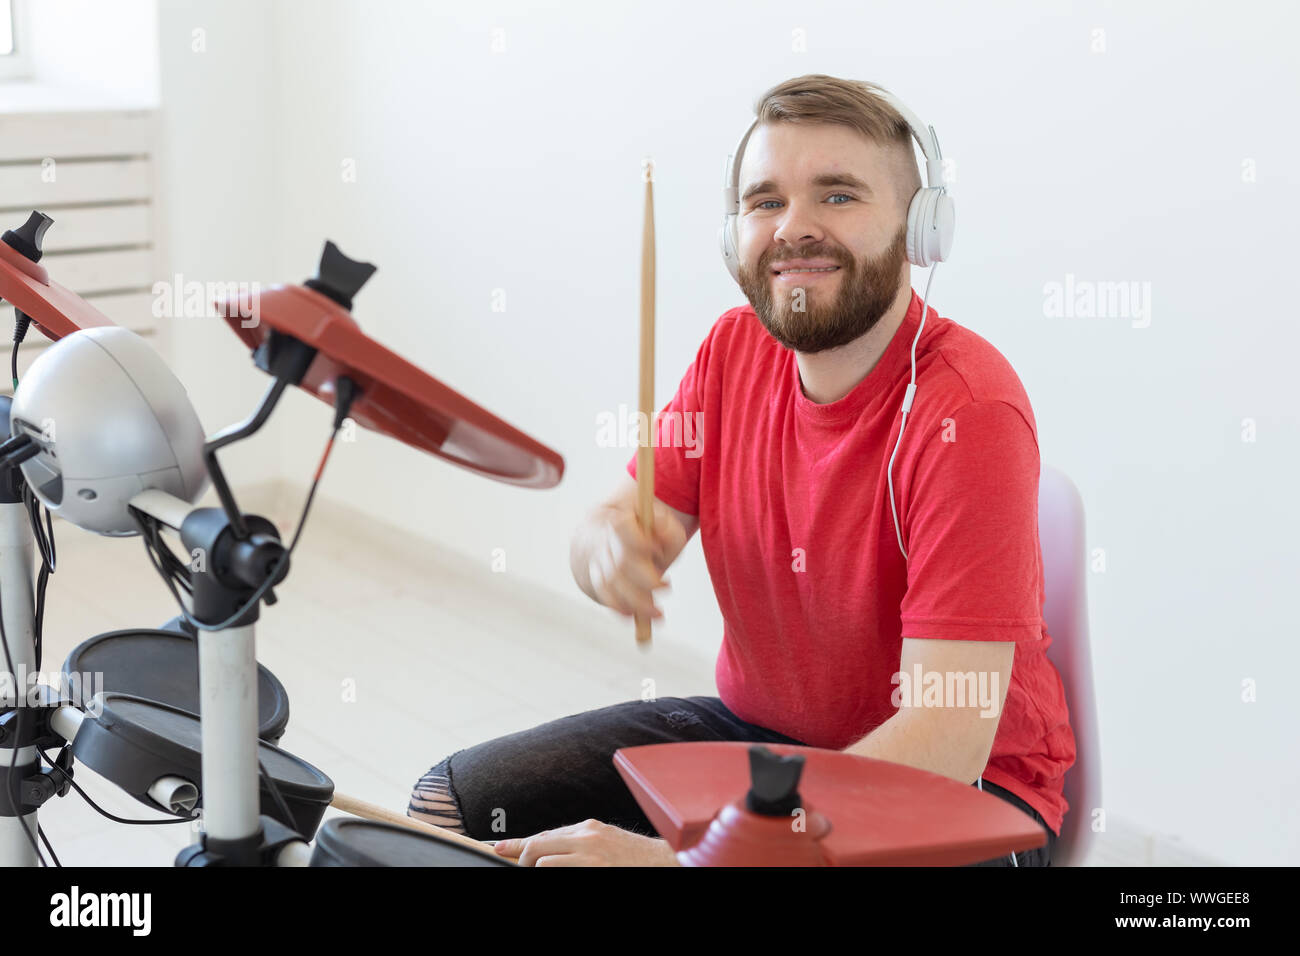 Music, people and hobby concept - man drummer playing the drum and looks like very emotional Stock Photo